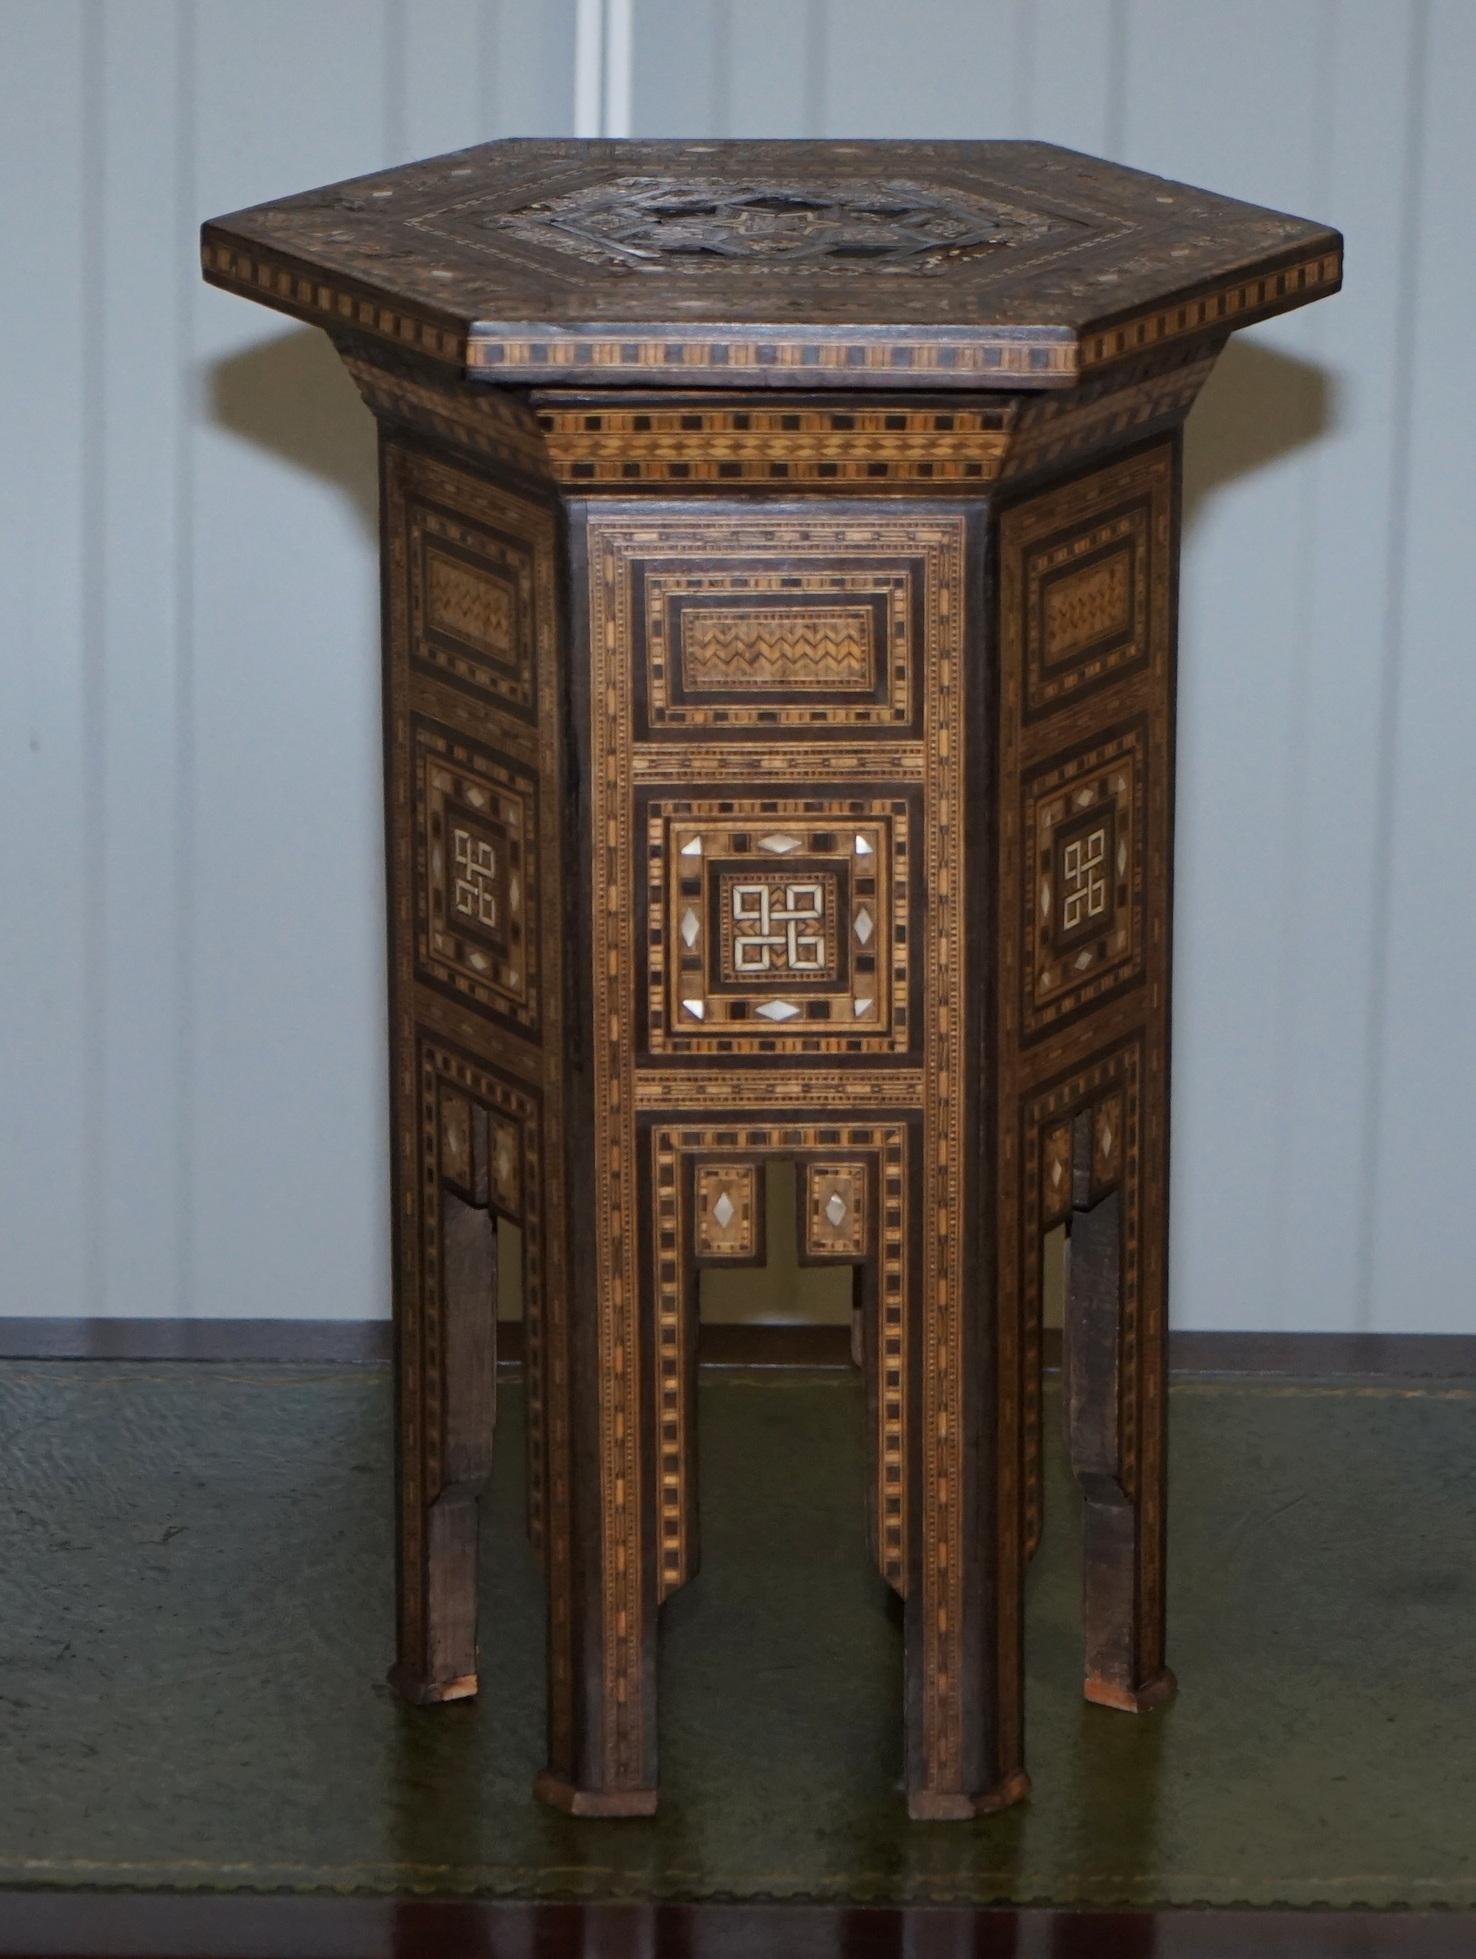 We are delighted to offer for sale this lovely and rare Syrian Marquetry inlaid wood side table retailed through Liberty's London 

This one is a lovely good sized decorative piece, ideally suited simply for decoration or as a lamp table

We